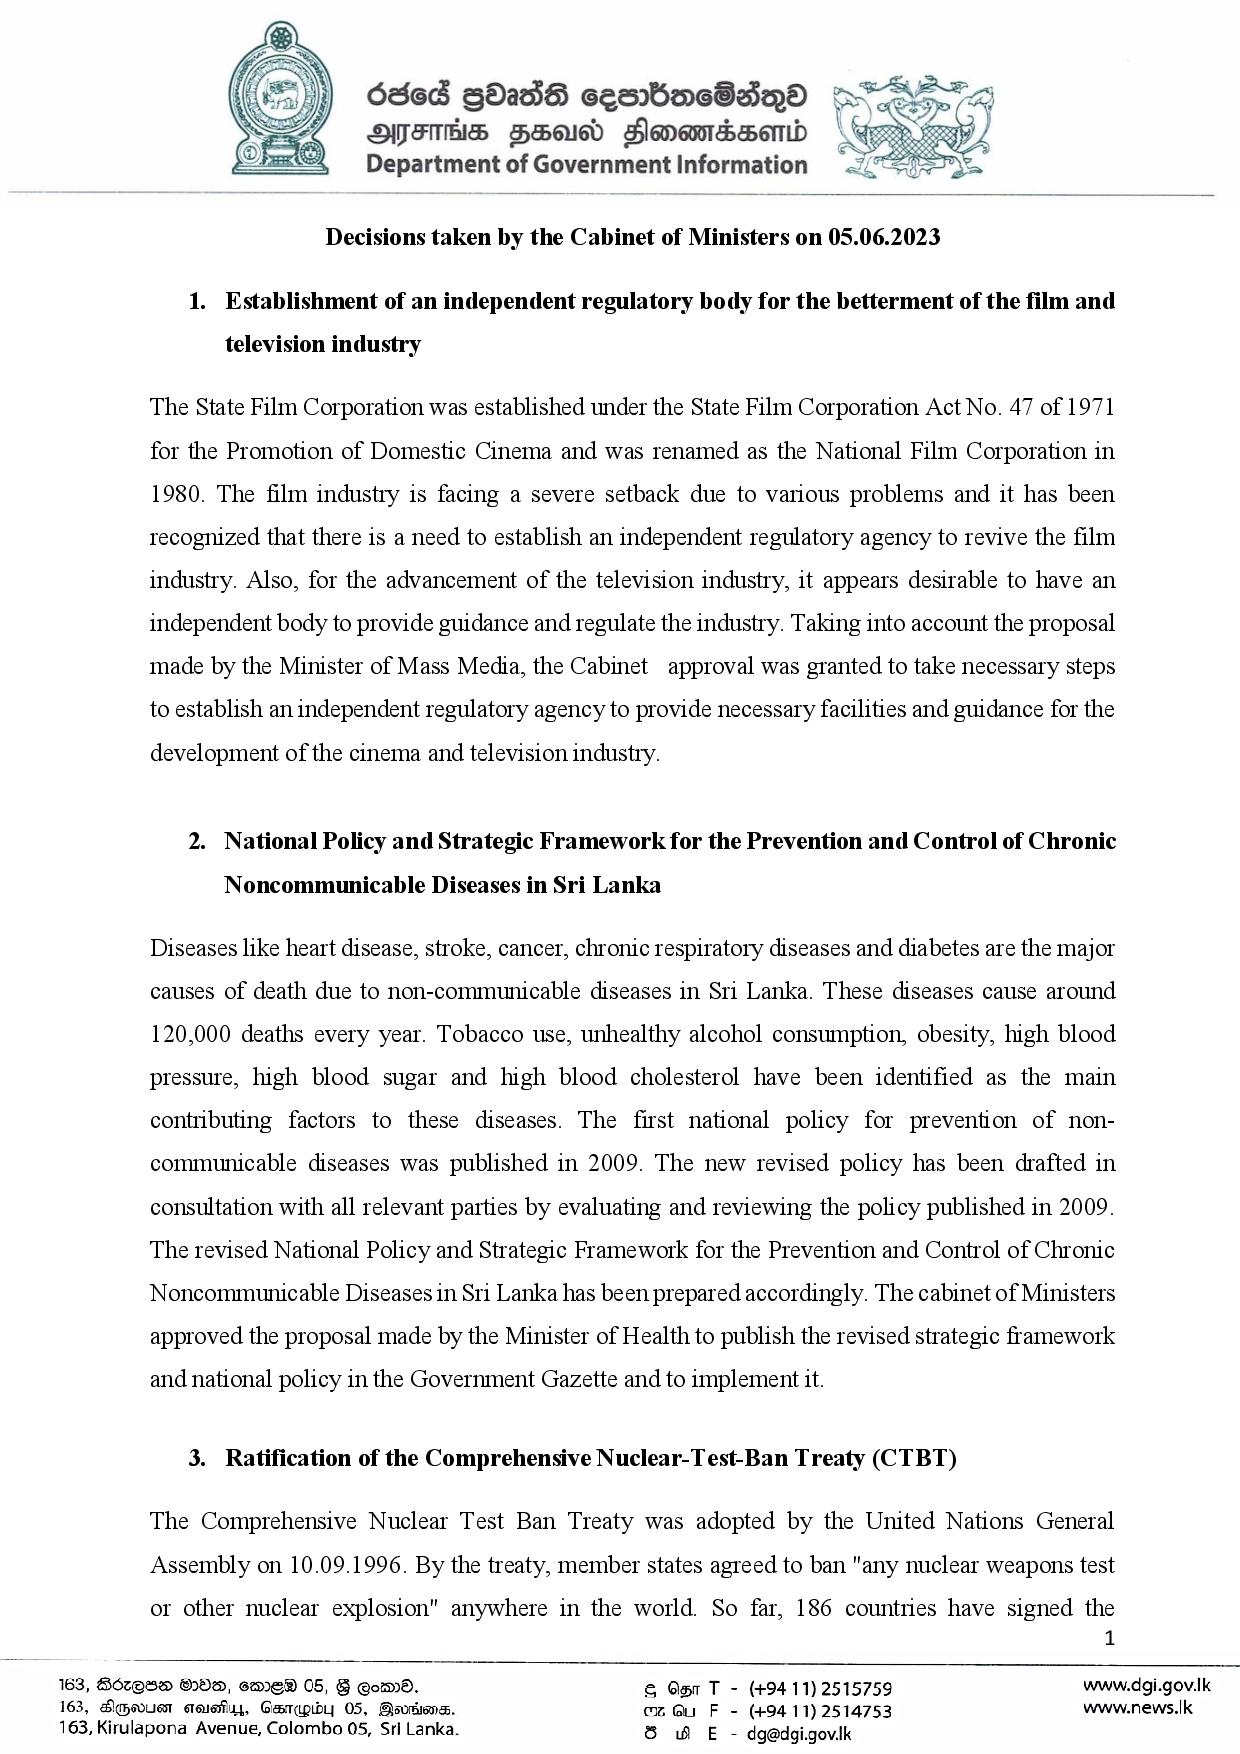 Cabinet Decisions on 05.06.2023 English page 001